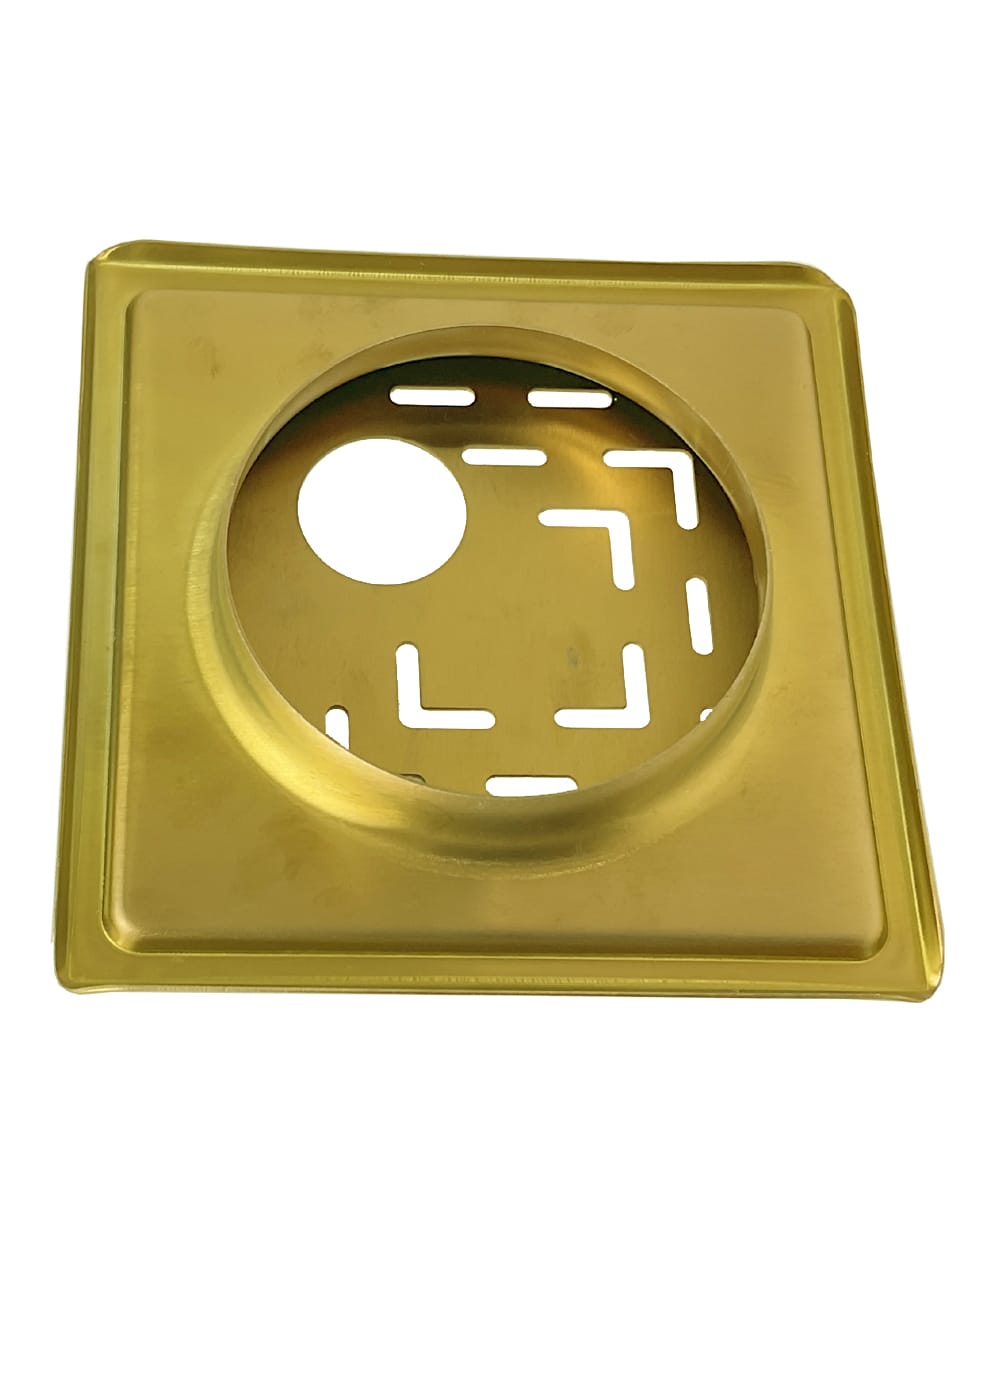  Grating 6x6" Square Ss 304  Hole (gold Ferry)